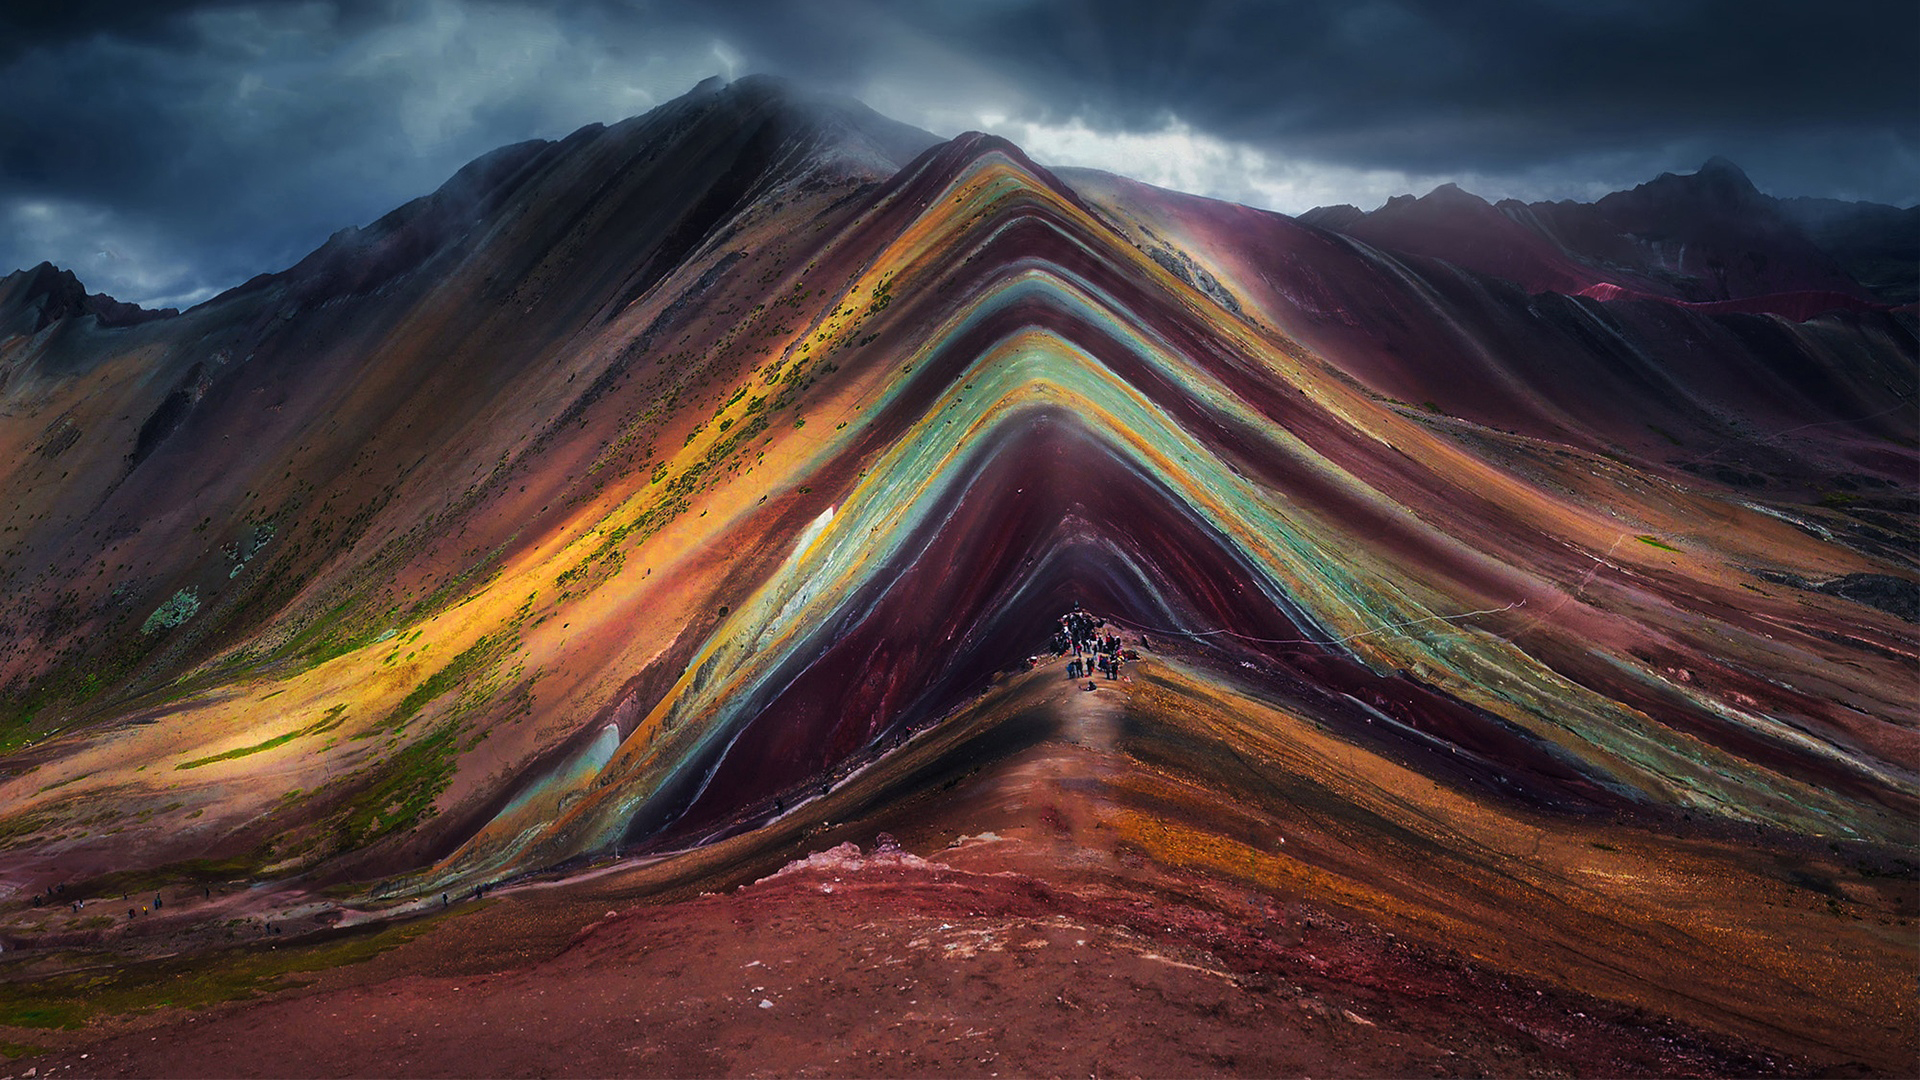 Colorful Mountain Under Black Cloudy Sky 2K Nature